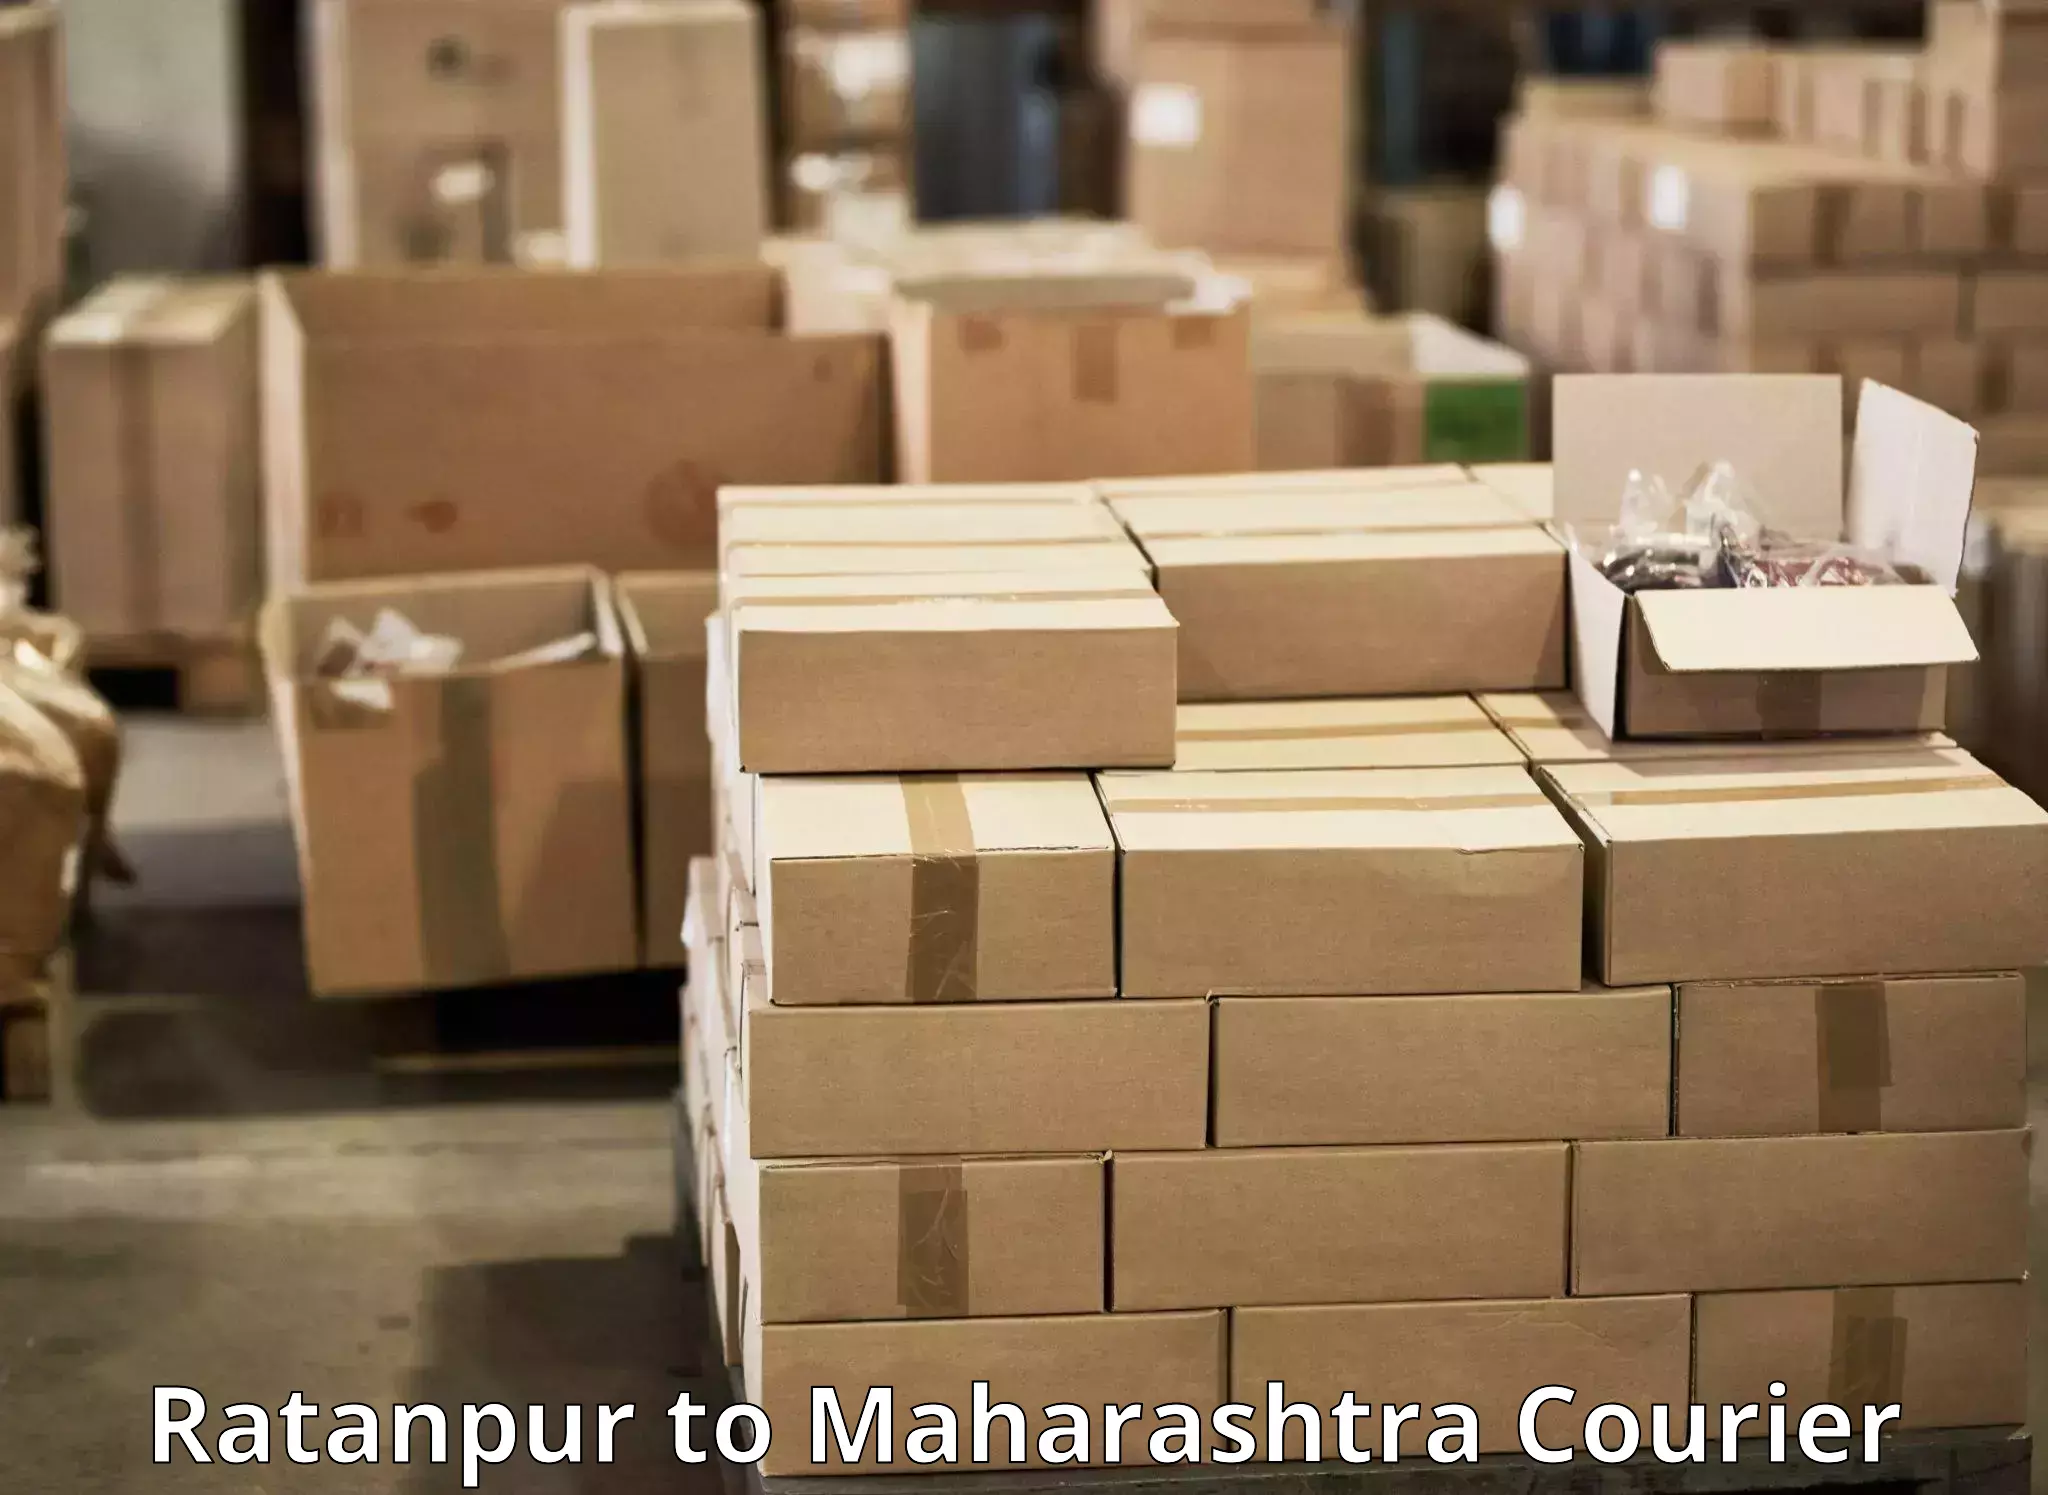 Overnight delivery in Ratanpur to Raigarh Maharashtra